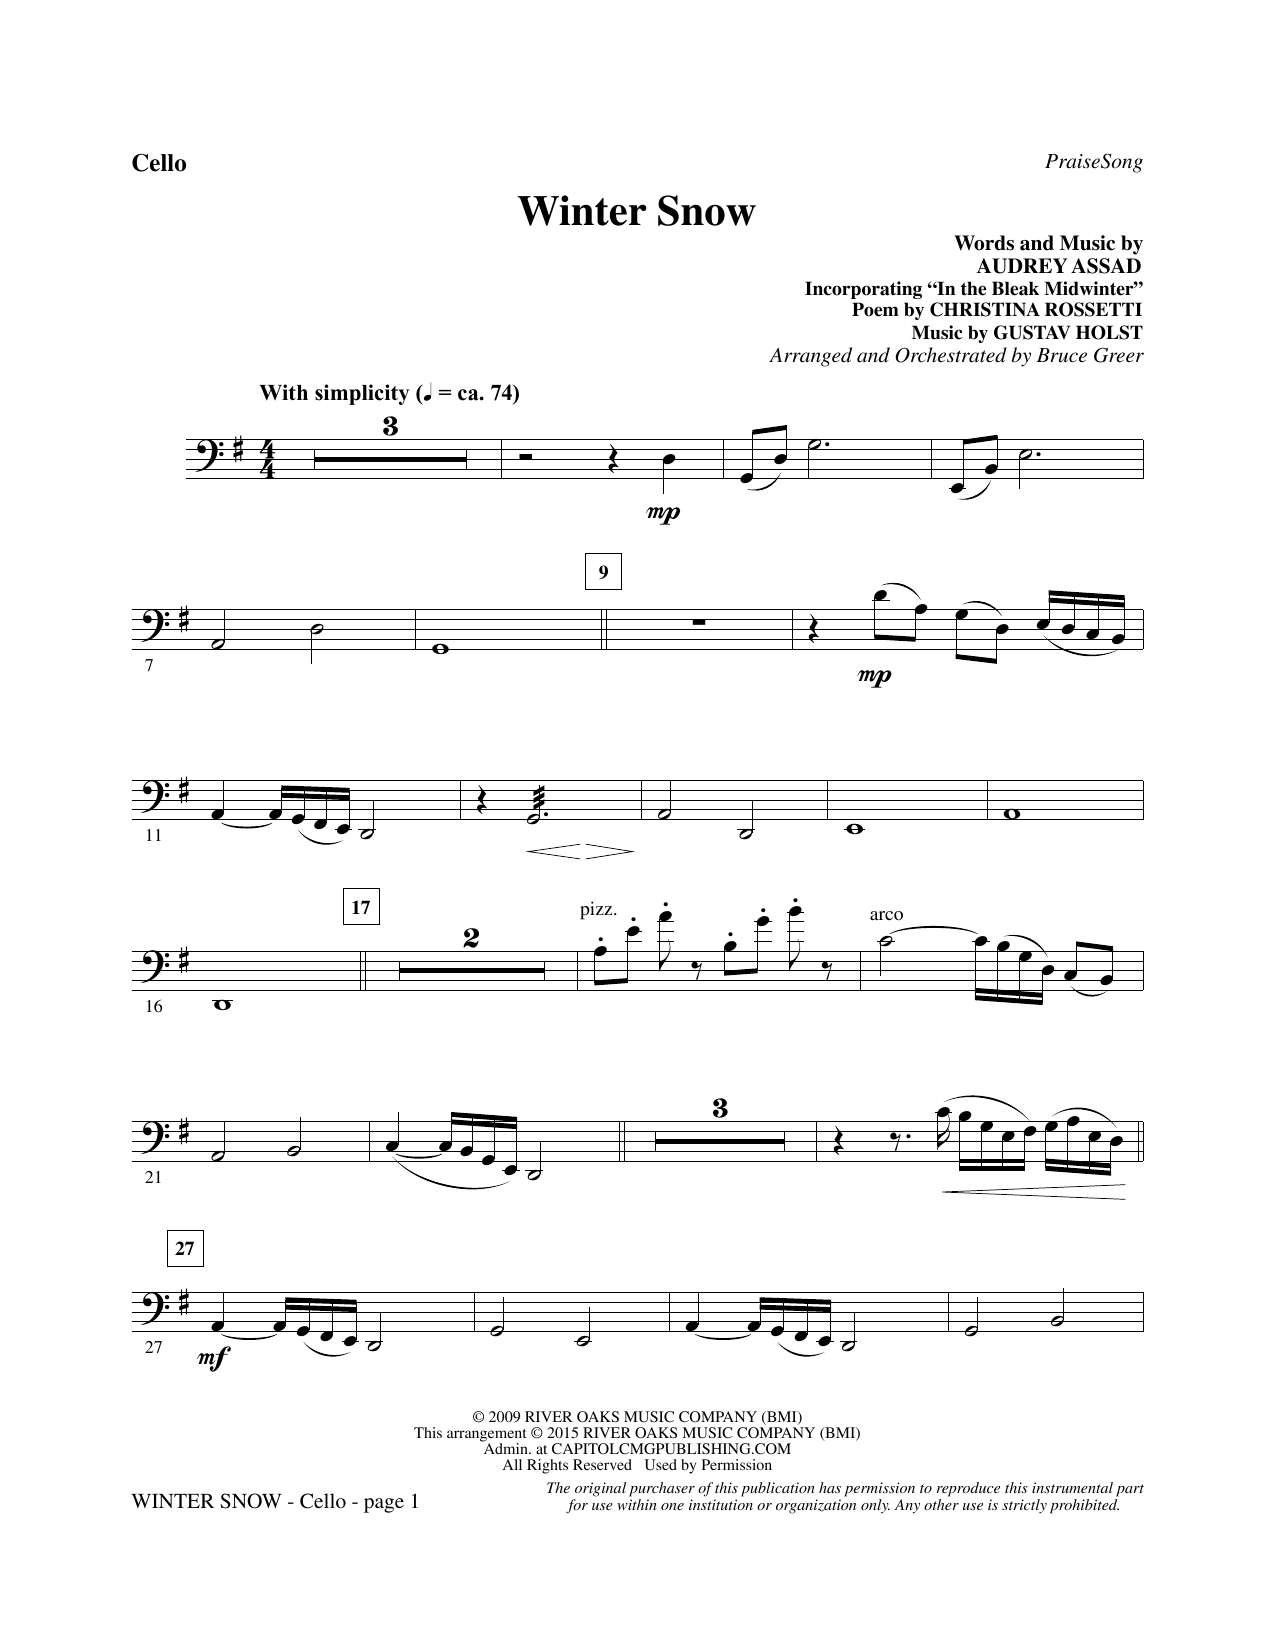 Bruce Greer Winter Snow - Cello sheet music notes and chords. Download Printable PDF.